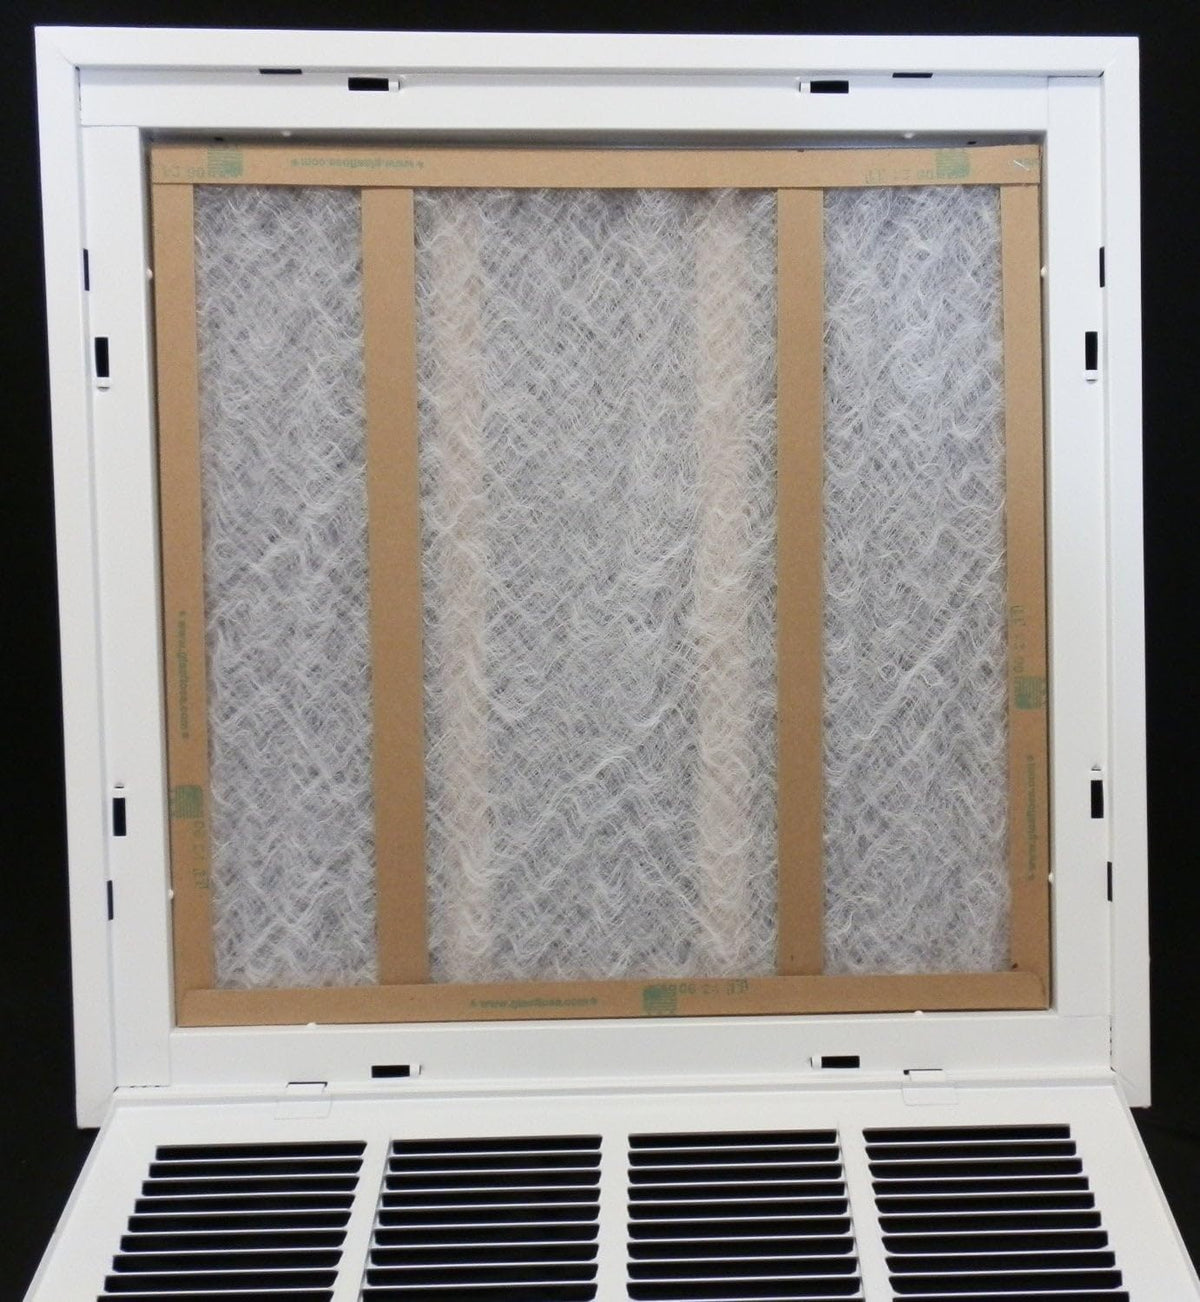 32&quot; X 16&quot; Steel Return Air Filter Grille for 1&quot; Filter - Removable Frame - [Outer Dimensions: 34 5/8&quot; X 18 5/8&quot;]